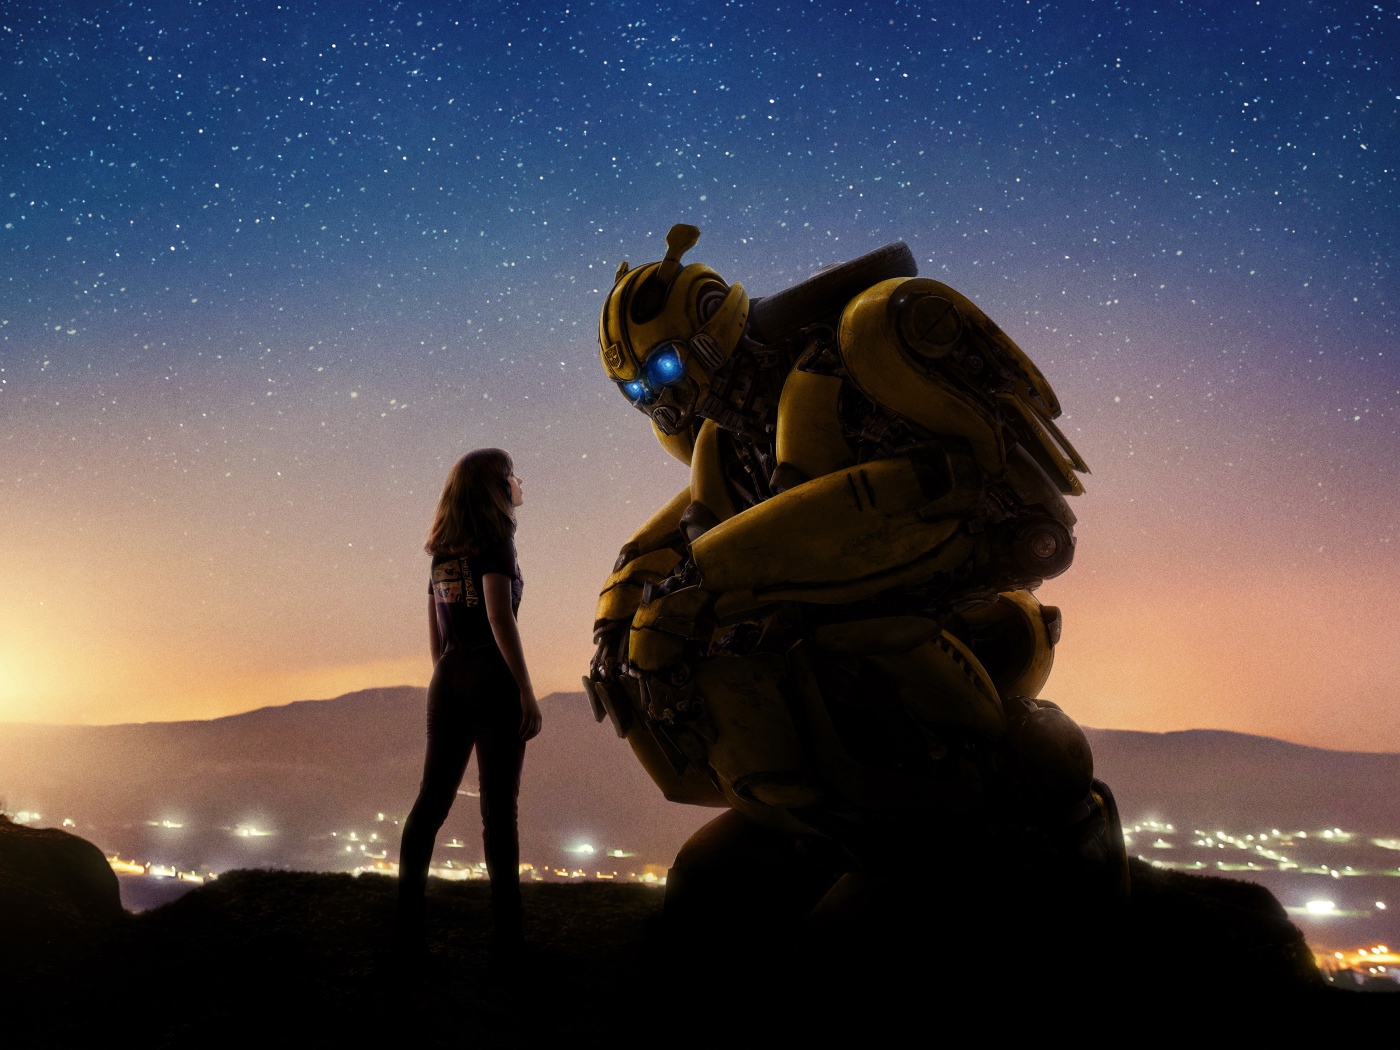 Poster of a new fantastic film Bumblebee (Transformers 6), 2018